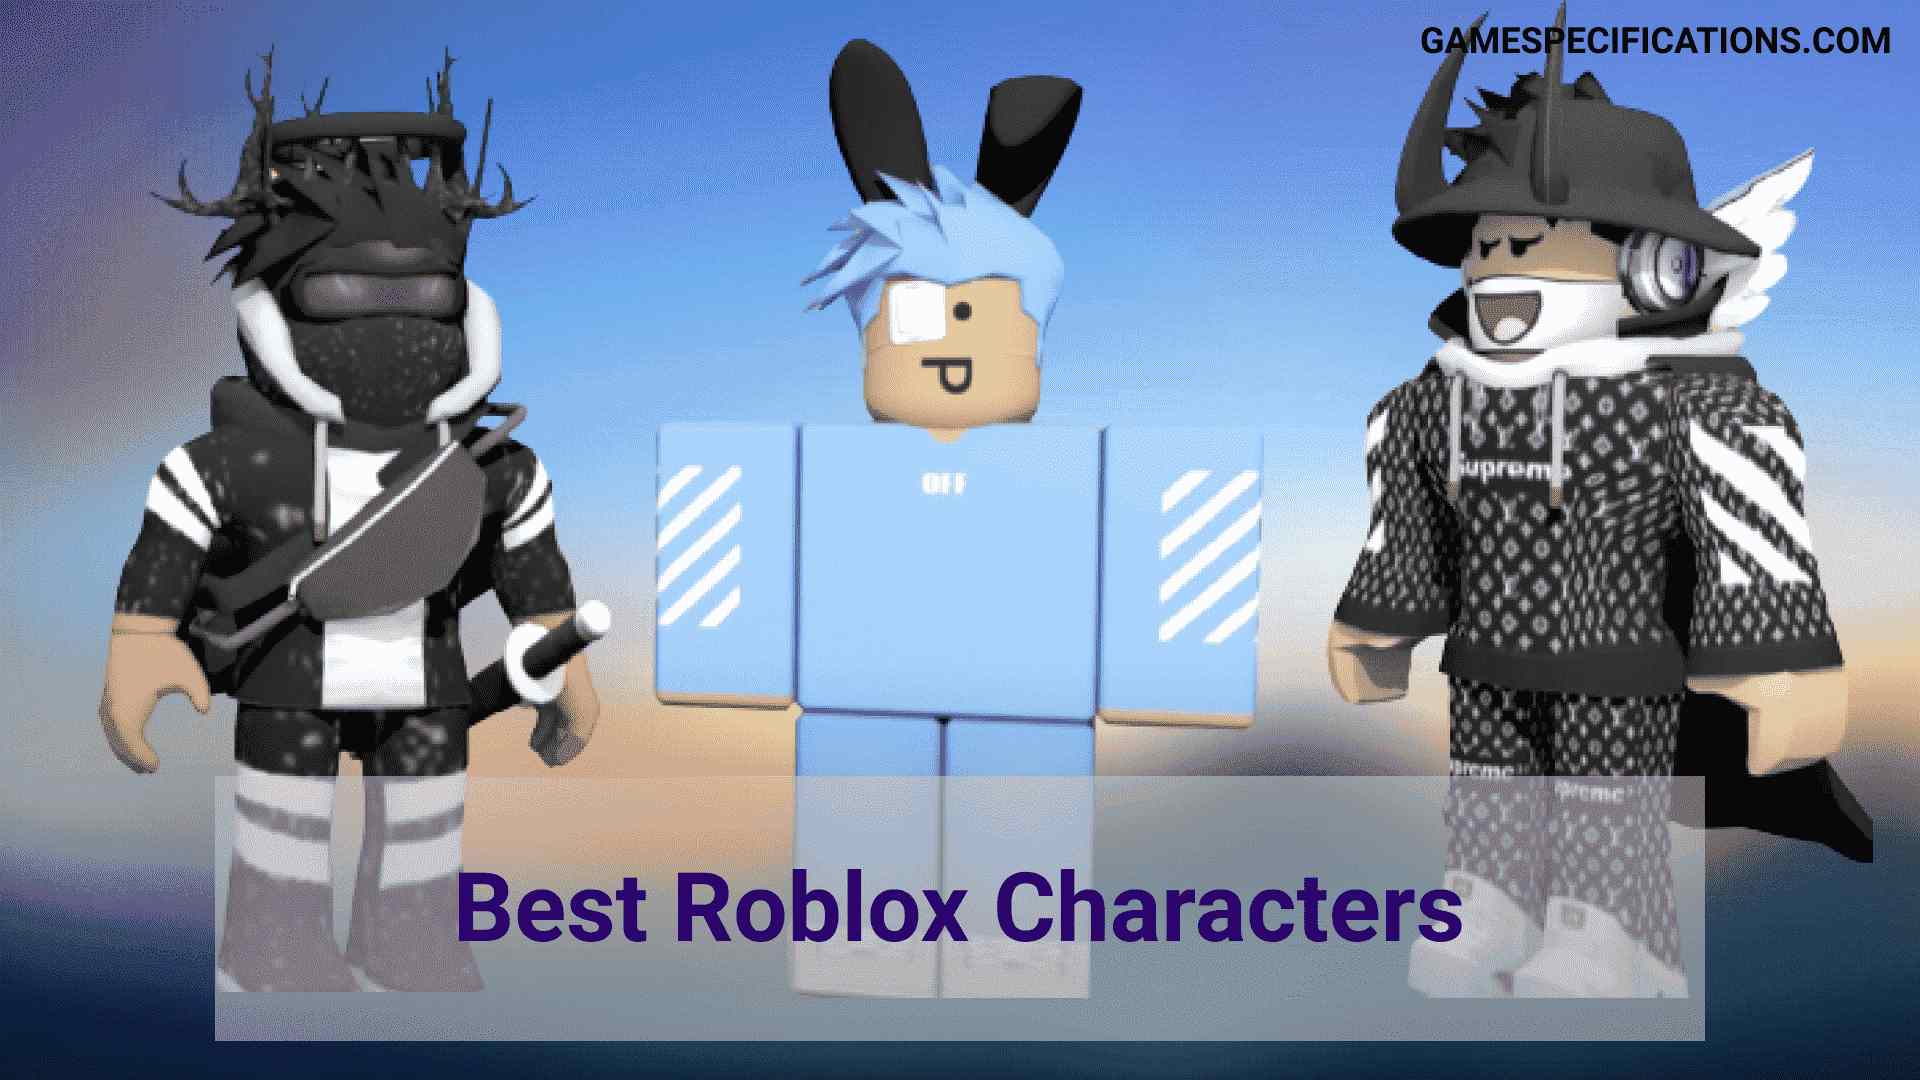 The 8 Best Roblox Avatar Ideas From ZephGamez